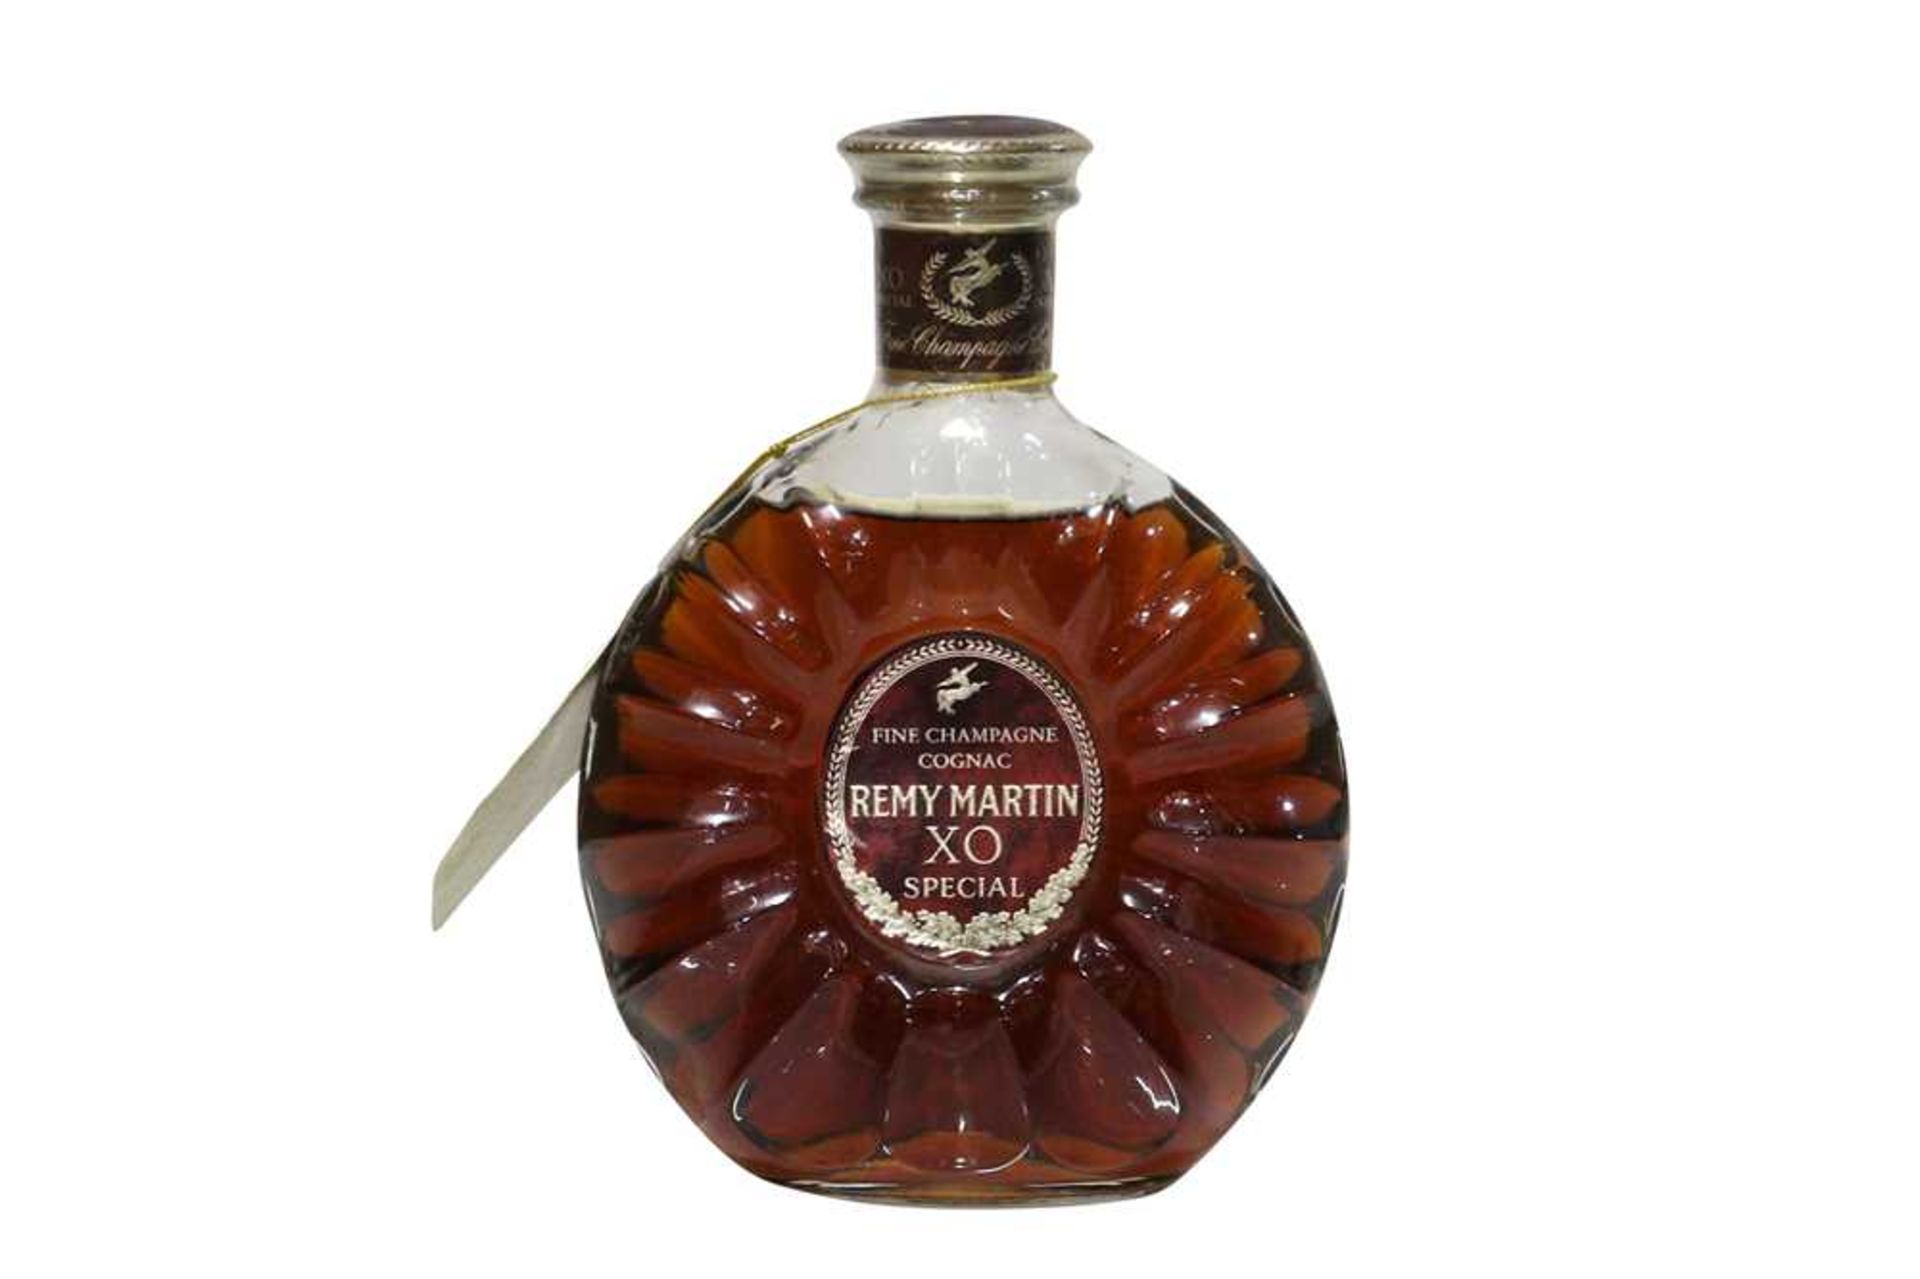 Remy Martin, XO Special, Fine Champagne Cognac, 40% vol, 70cl, one bottle